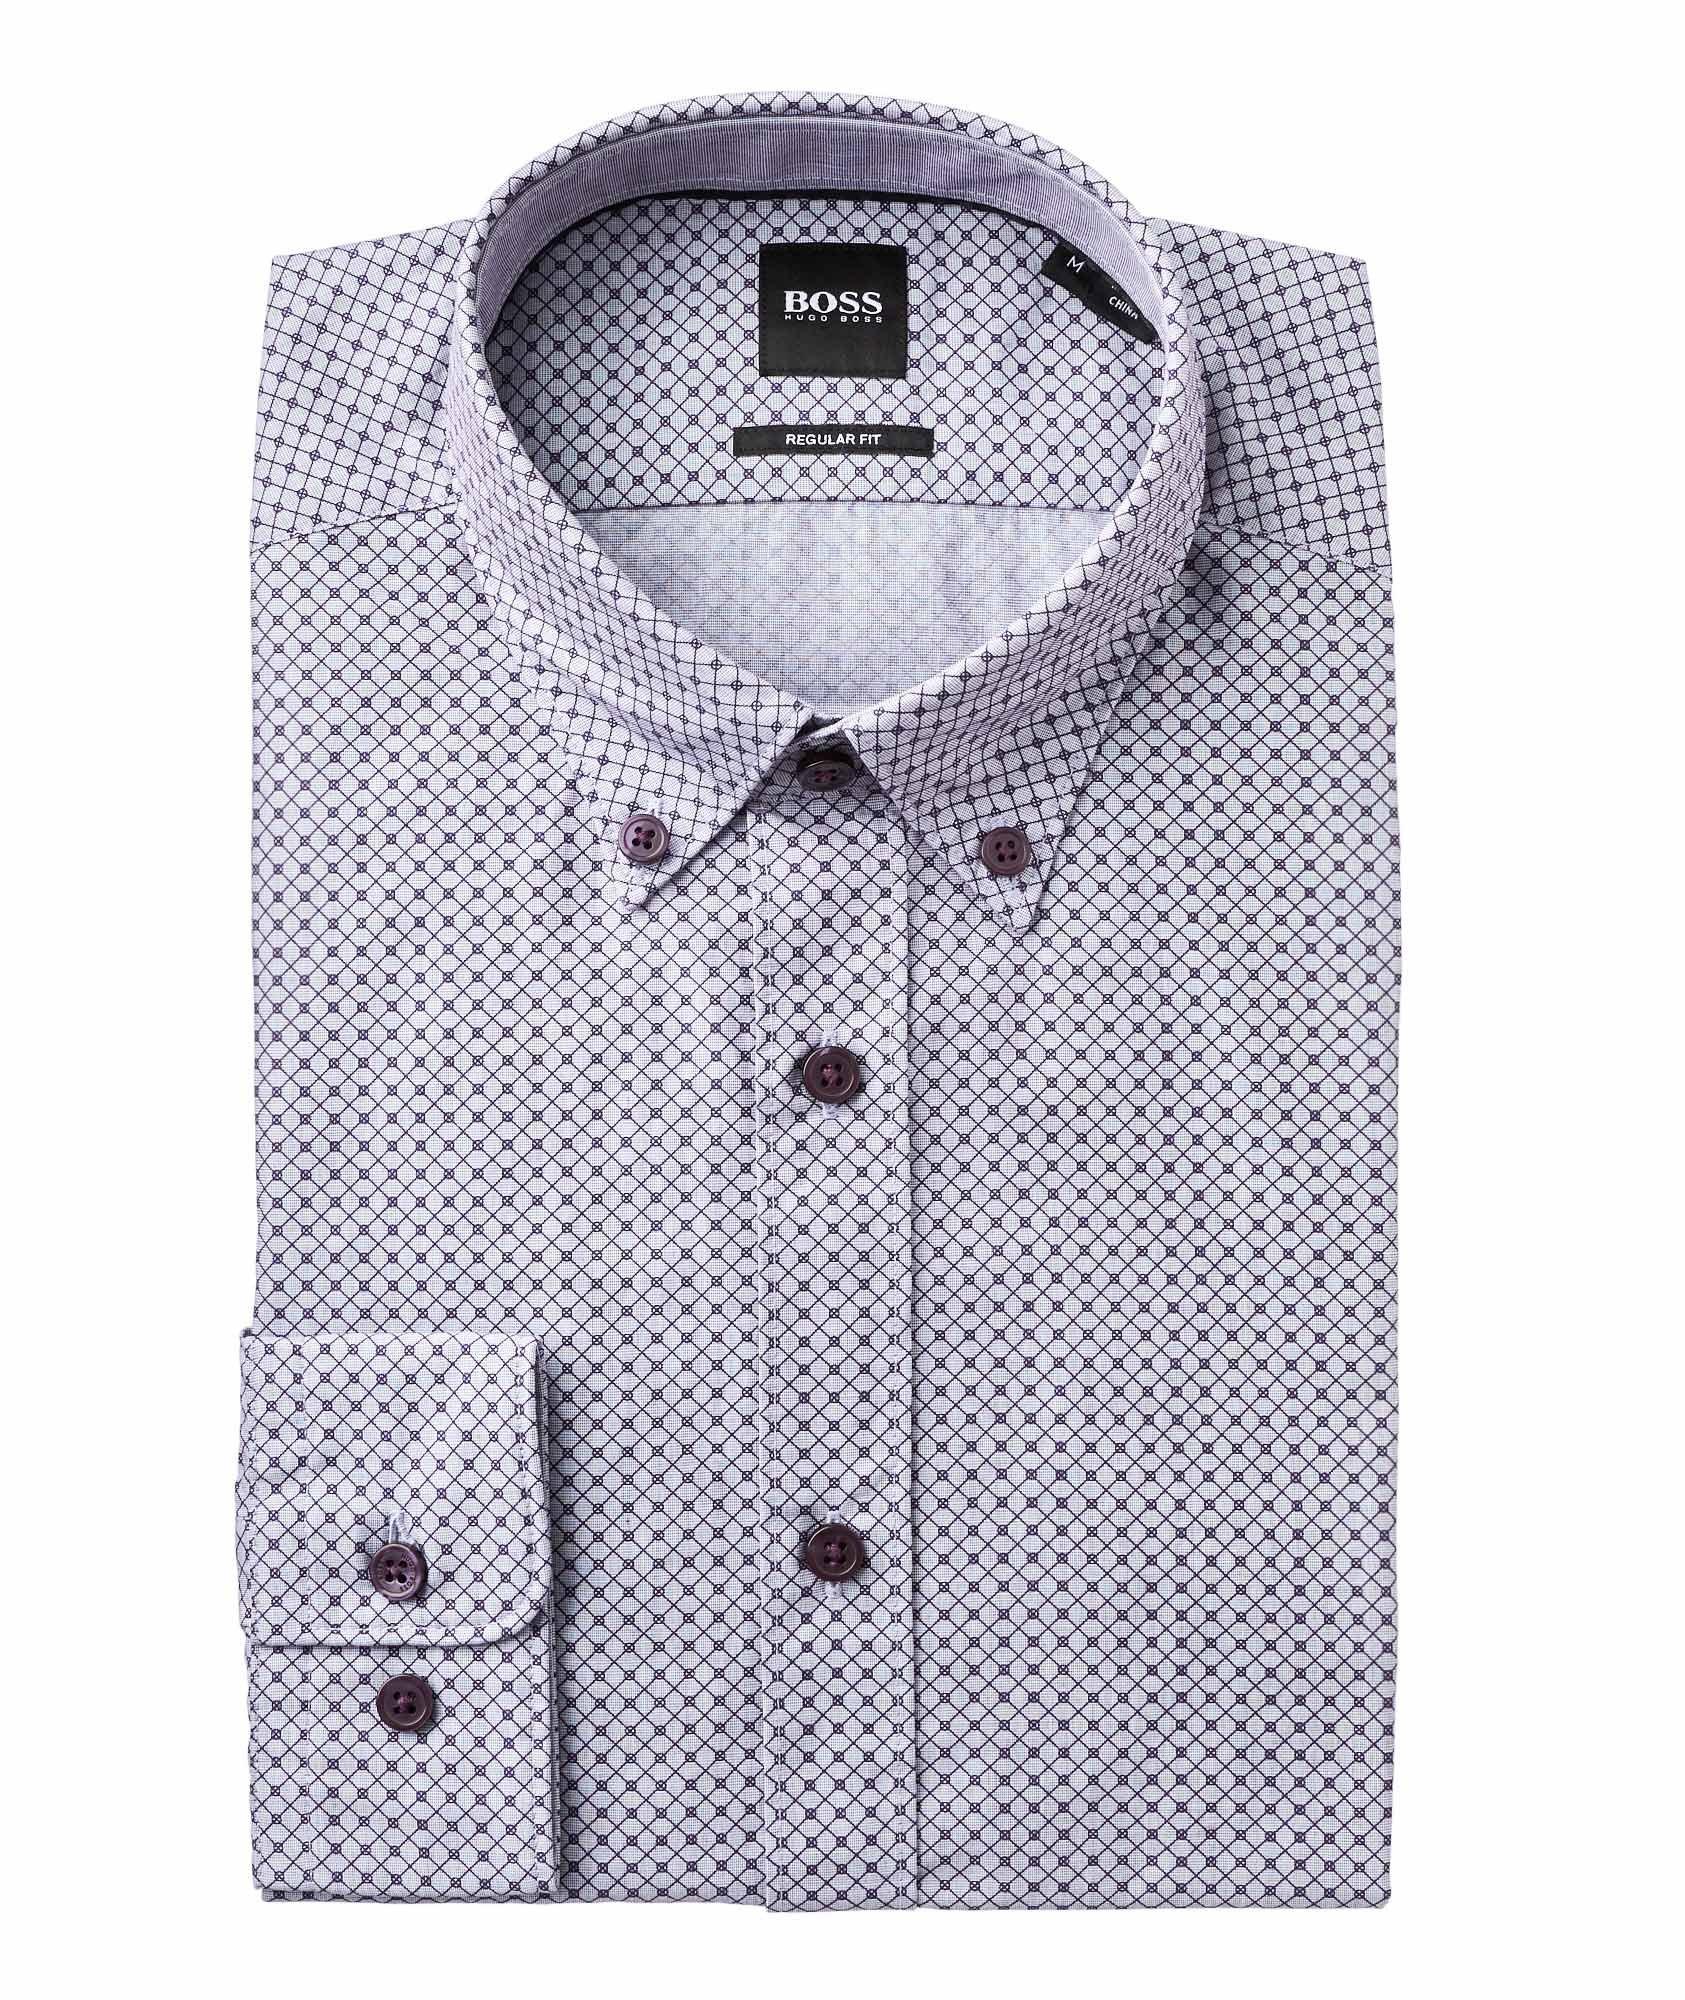 Contemporary Fit Neat-Printed Cotton Shirt image 0